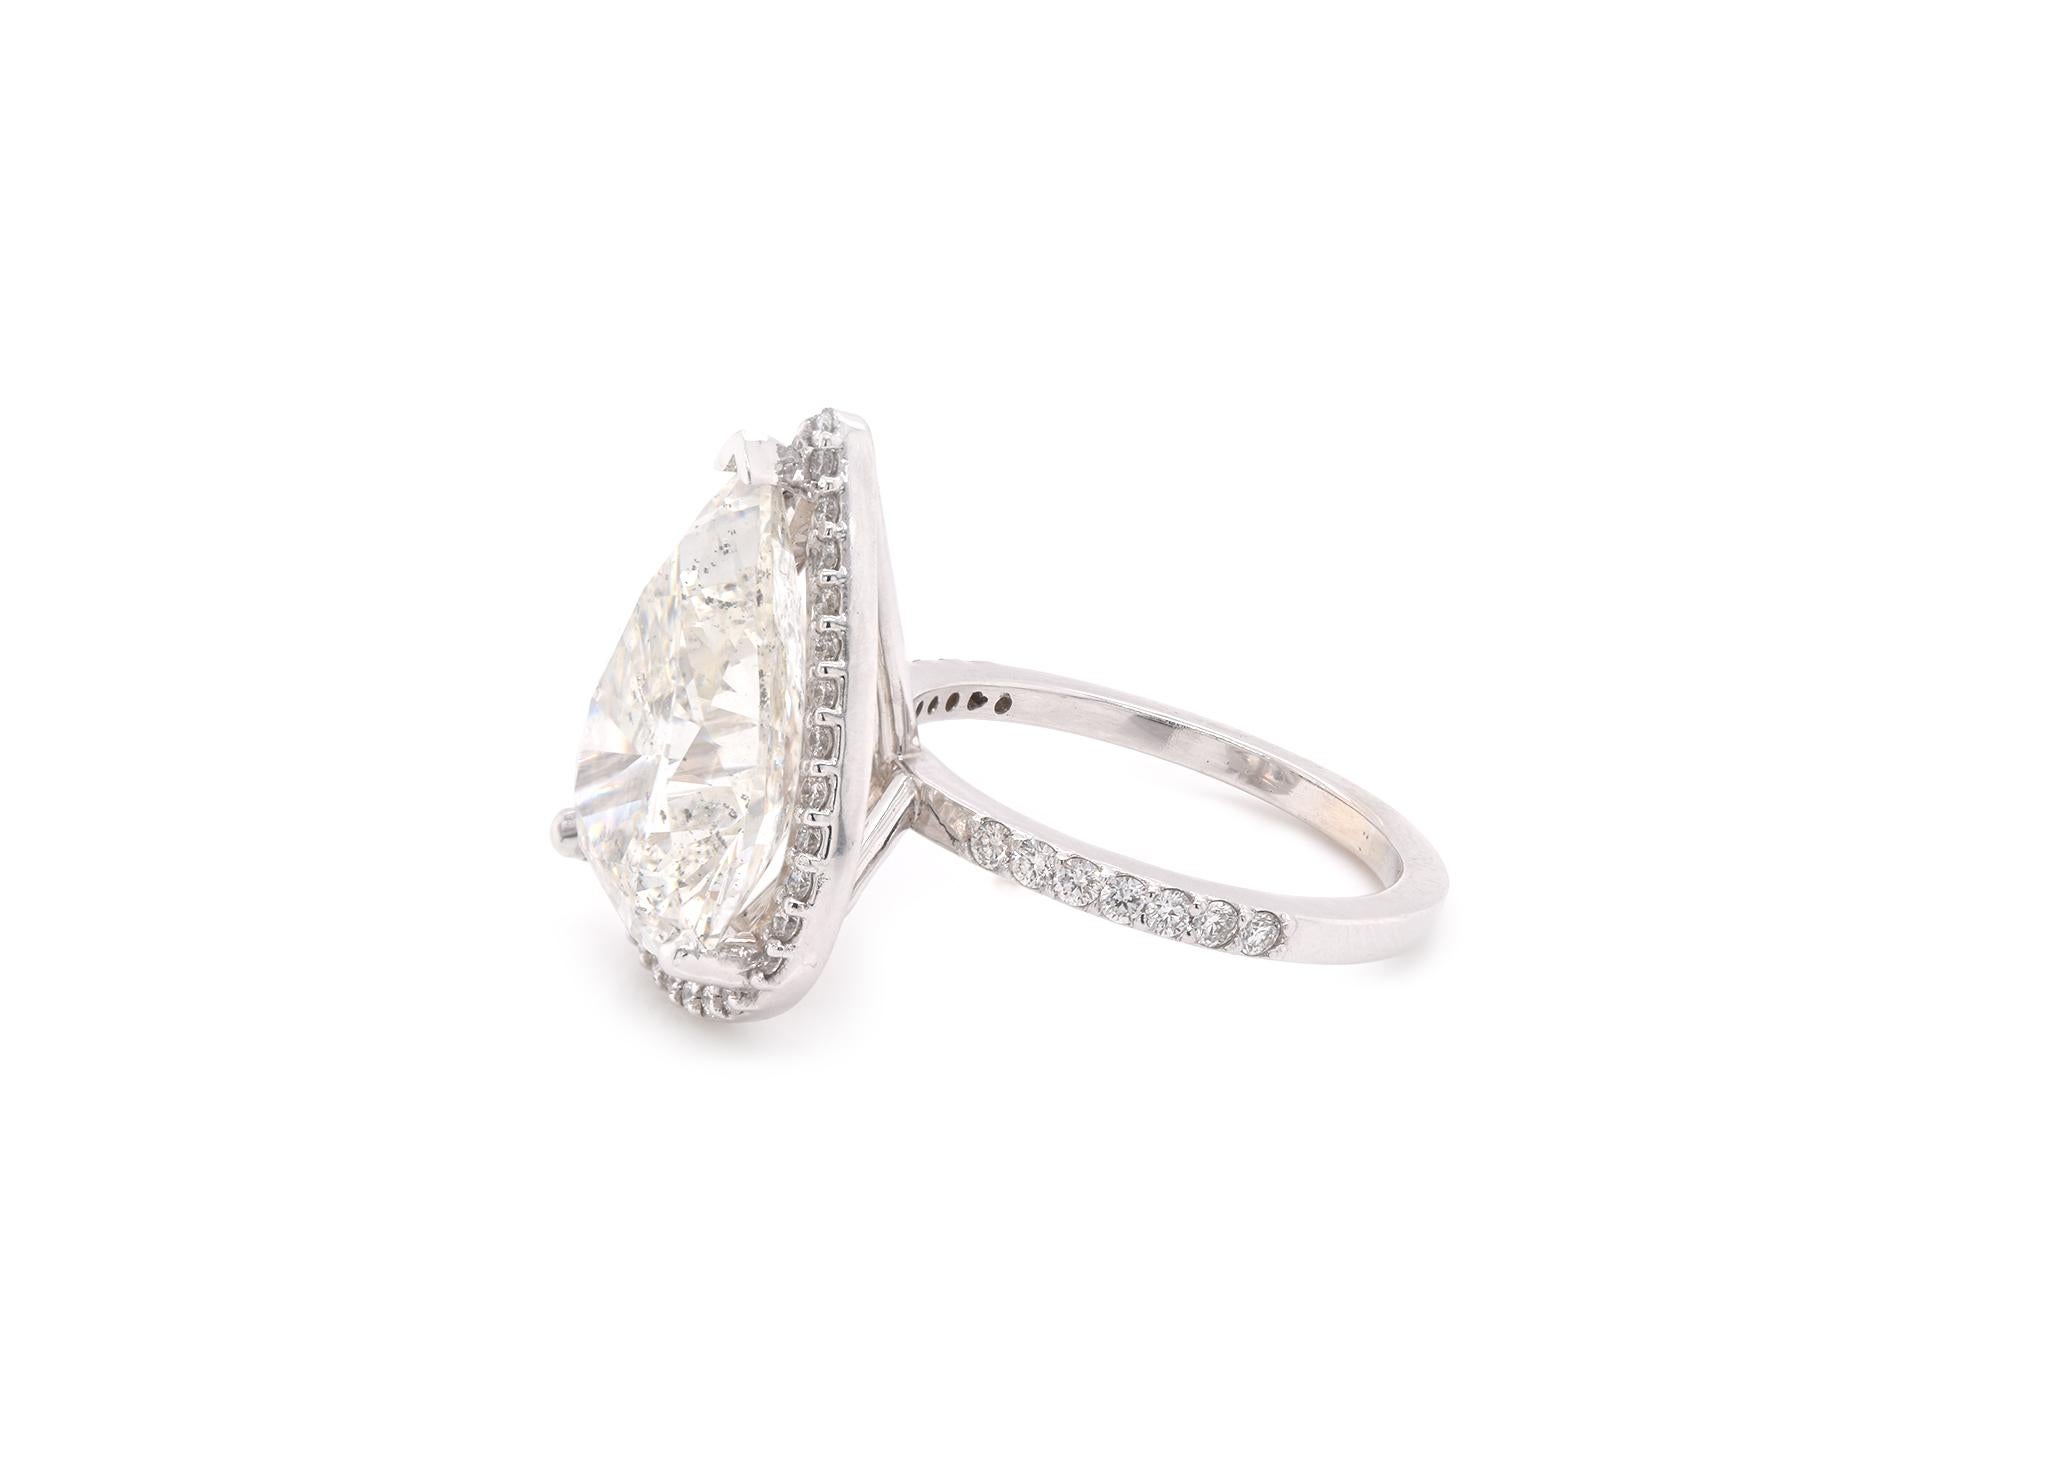 Material: 14k white gold 
Center Diamond: 1 pear cut diamond = 10.09ct  
Color: I
Clarity: I1
Mounting Diamonds: 47 round brilliant cuts = 0.51cttw
Color: G-H
Clarity: VS2-SI1
Ring Size: 8 (please allow two additional shipping days for sizing